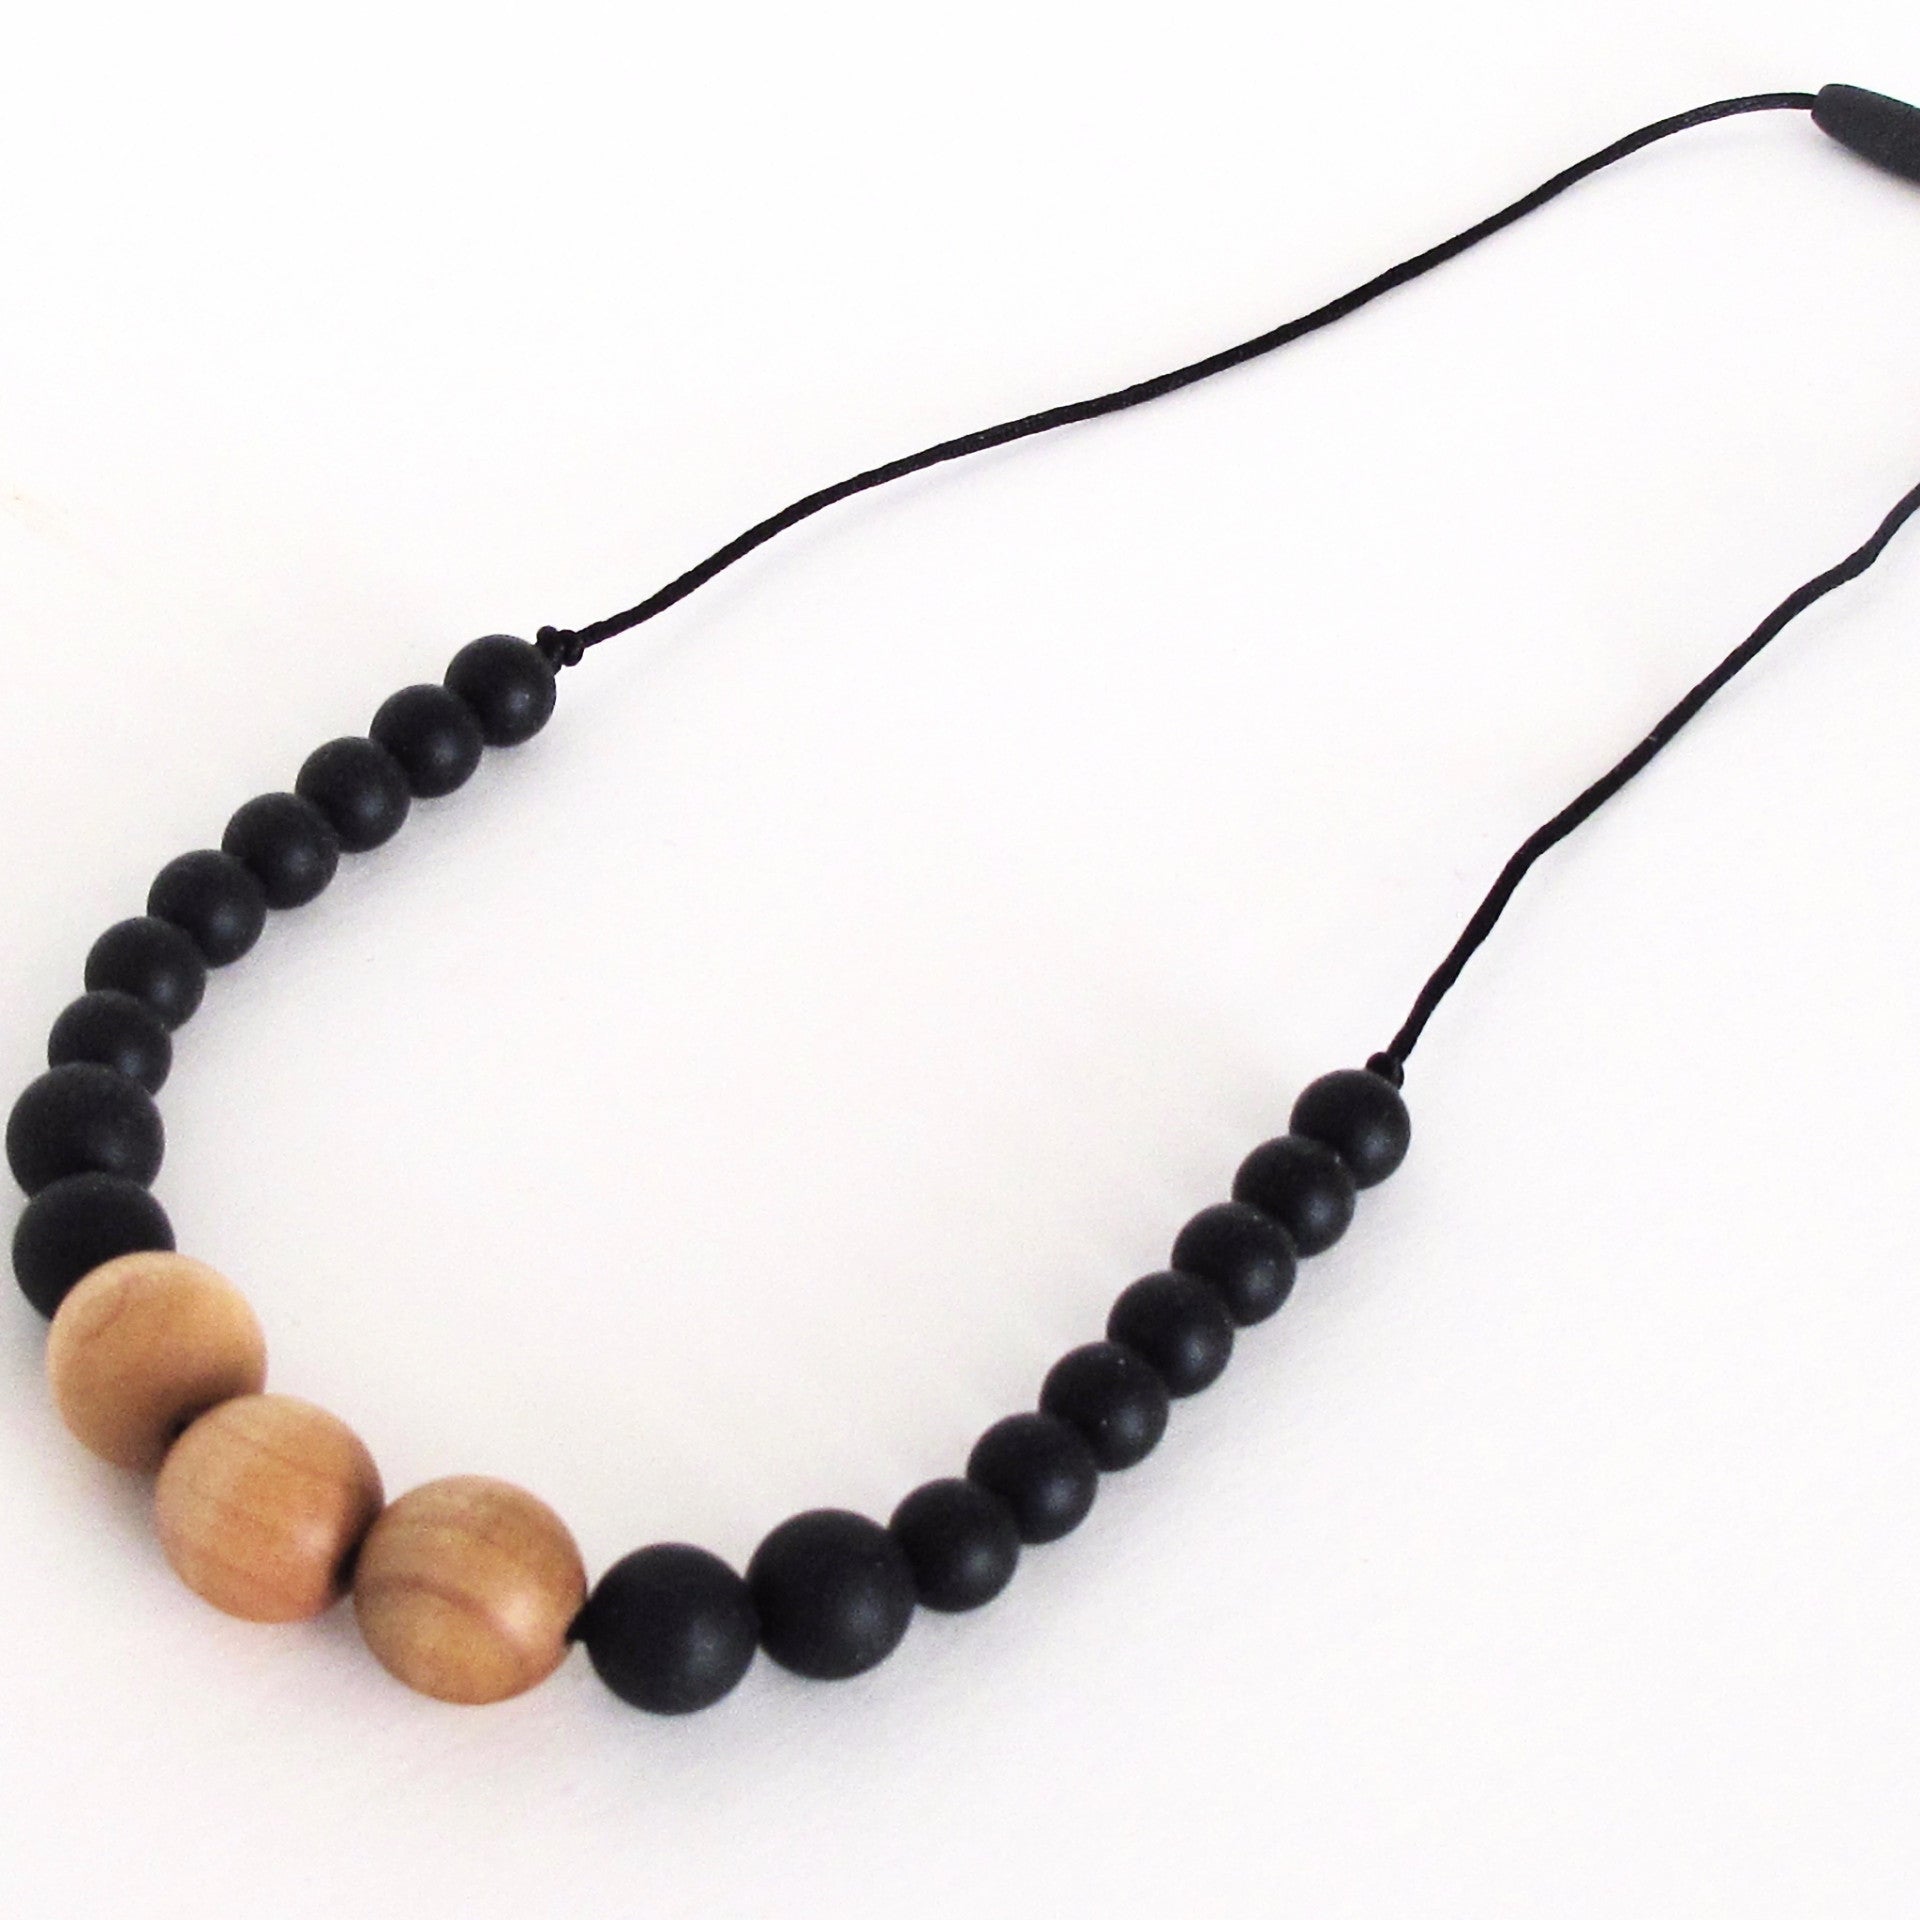 Elegant Teething Necklace in Food Grade Silicone and Wood